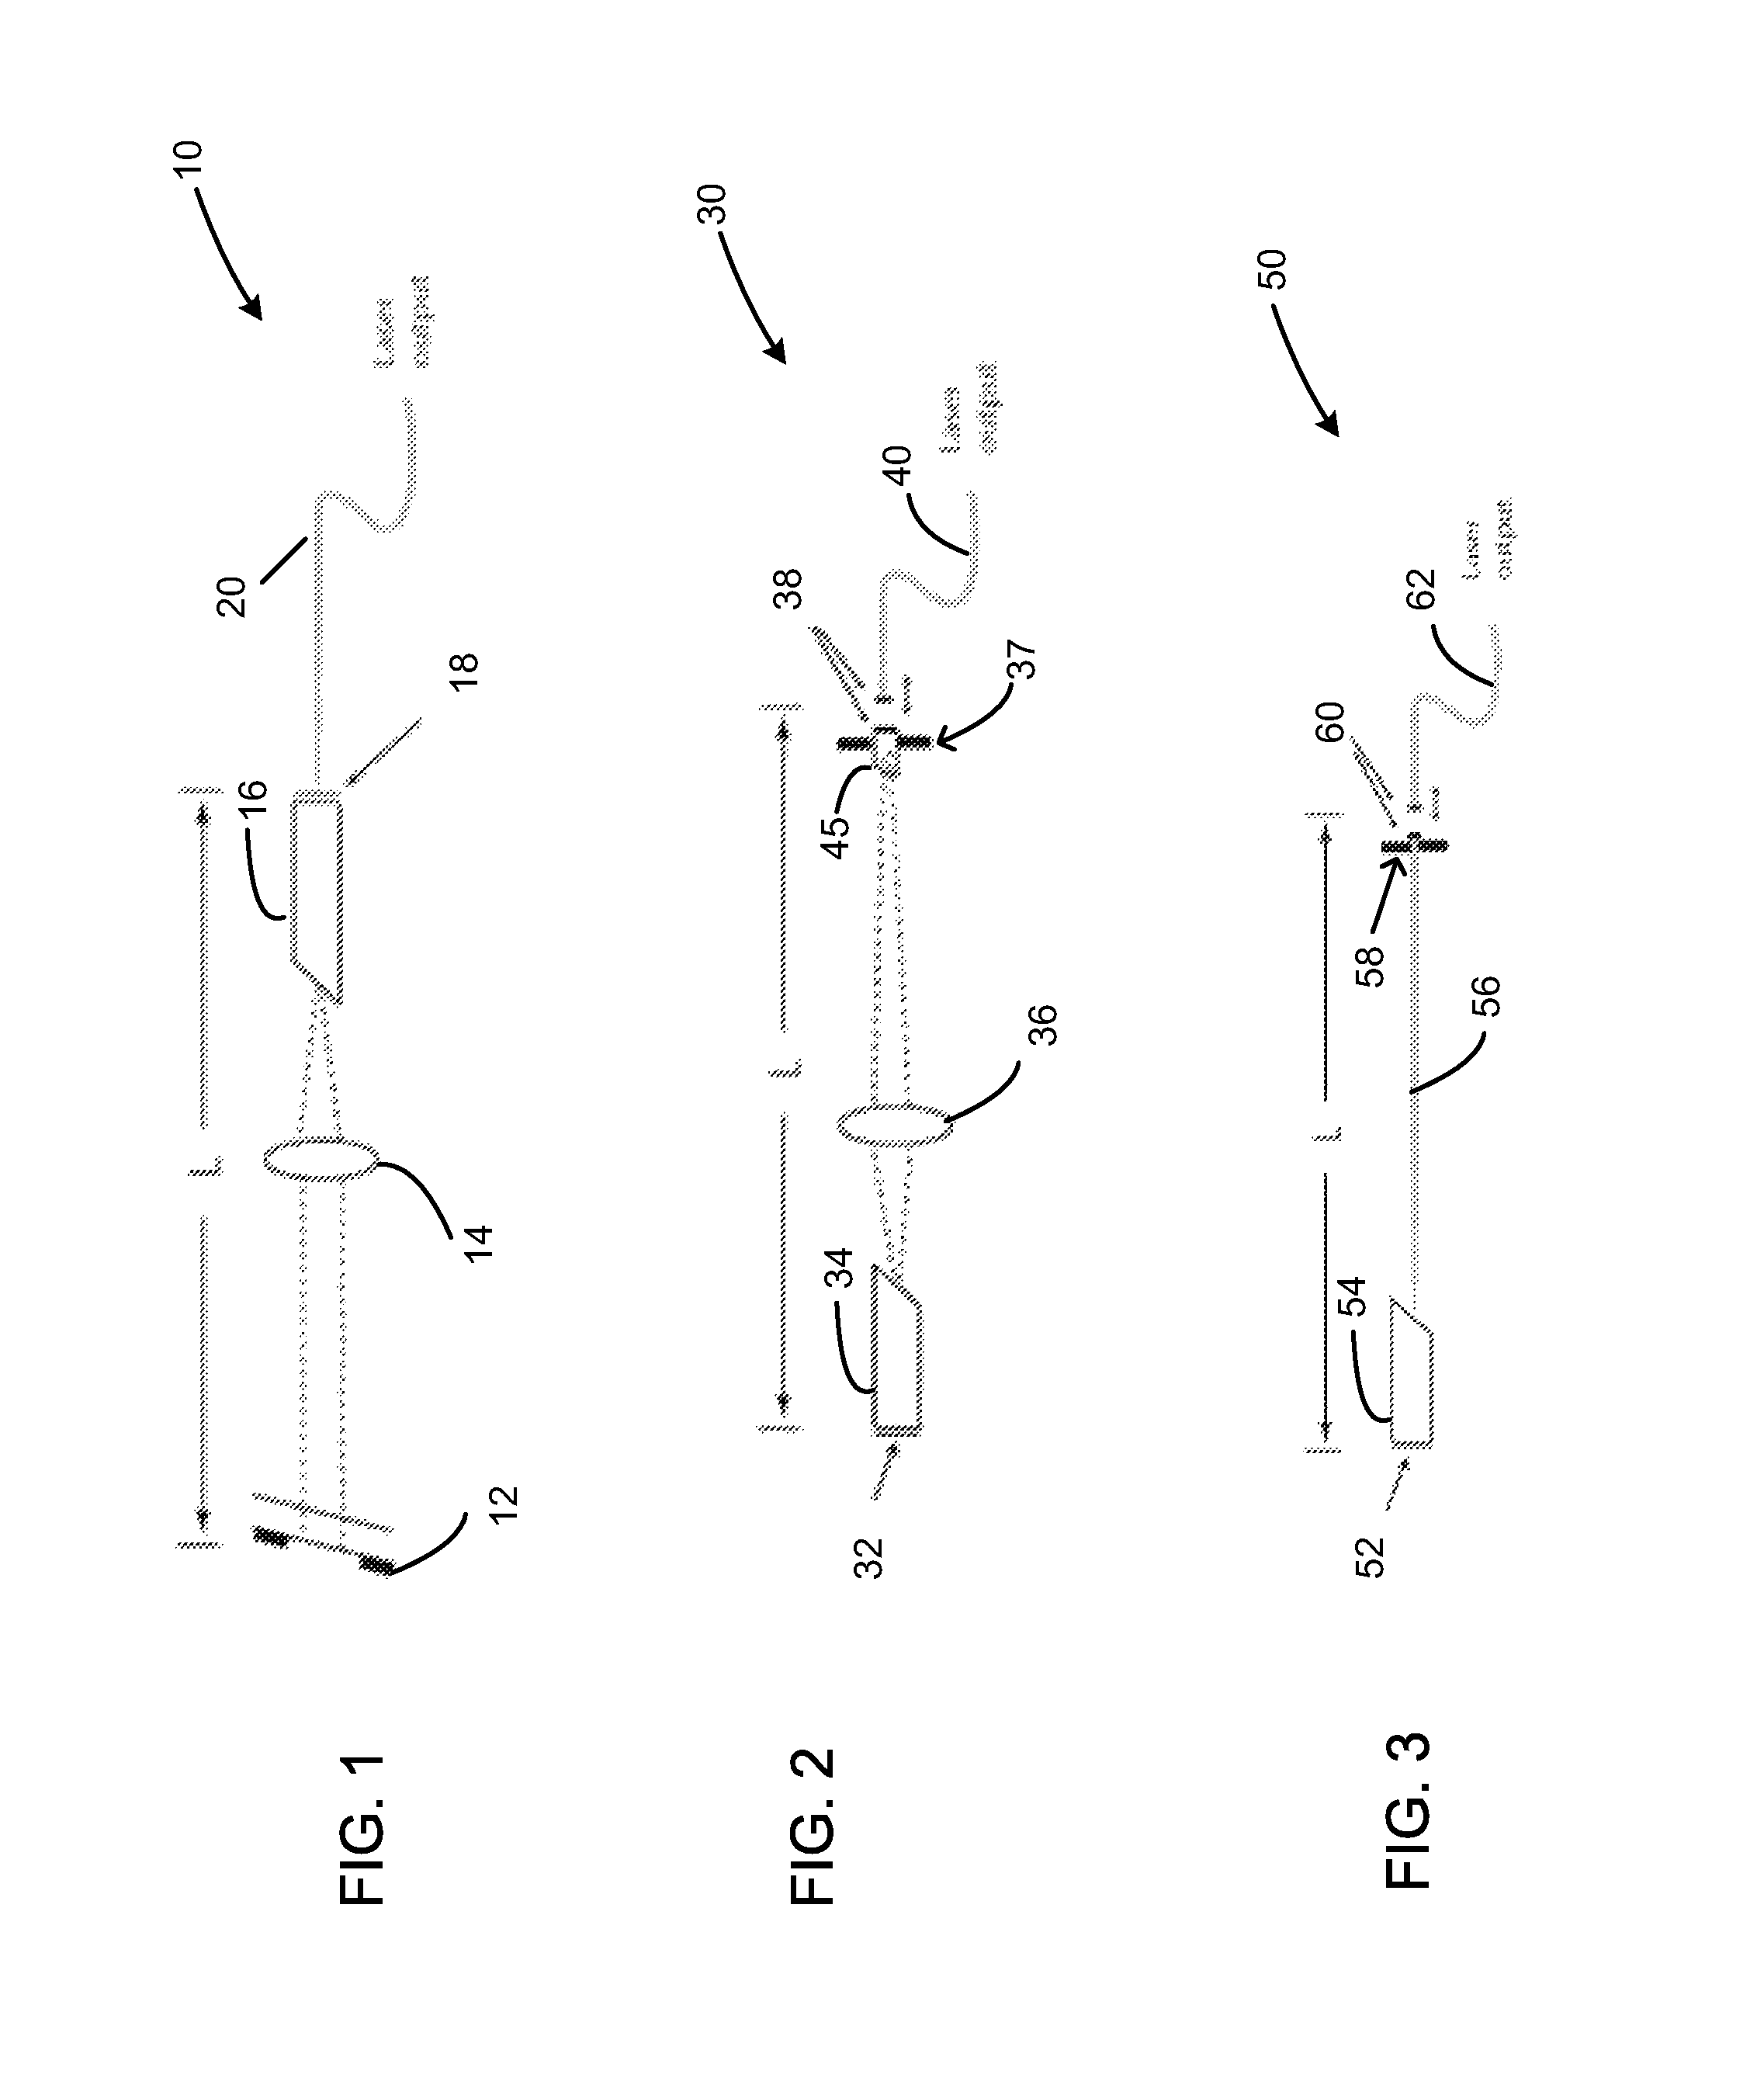 Swept mode-hopping laser system, methods, and devices for frequency-domain optical coherence tomography